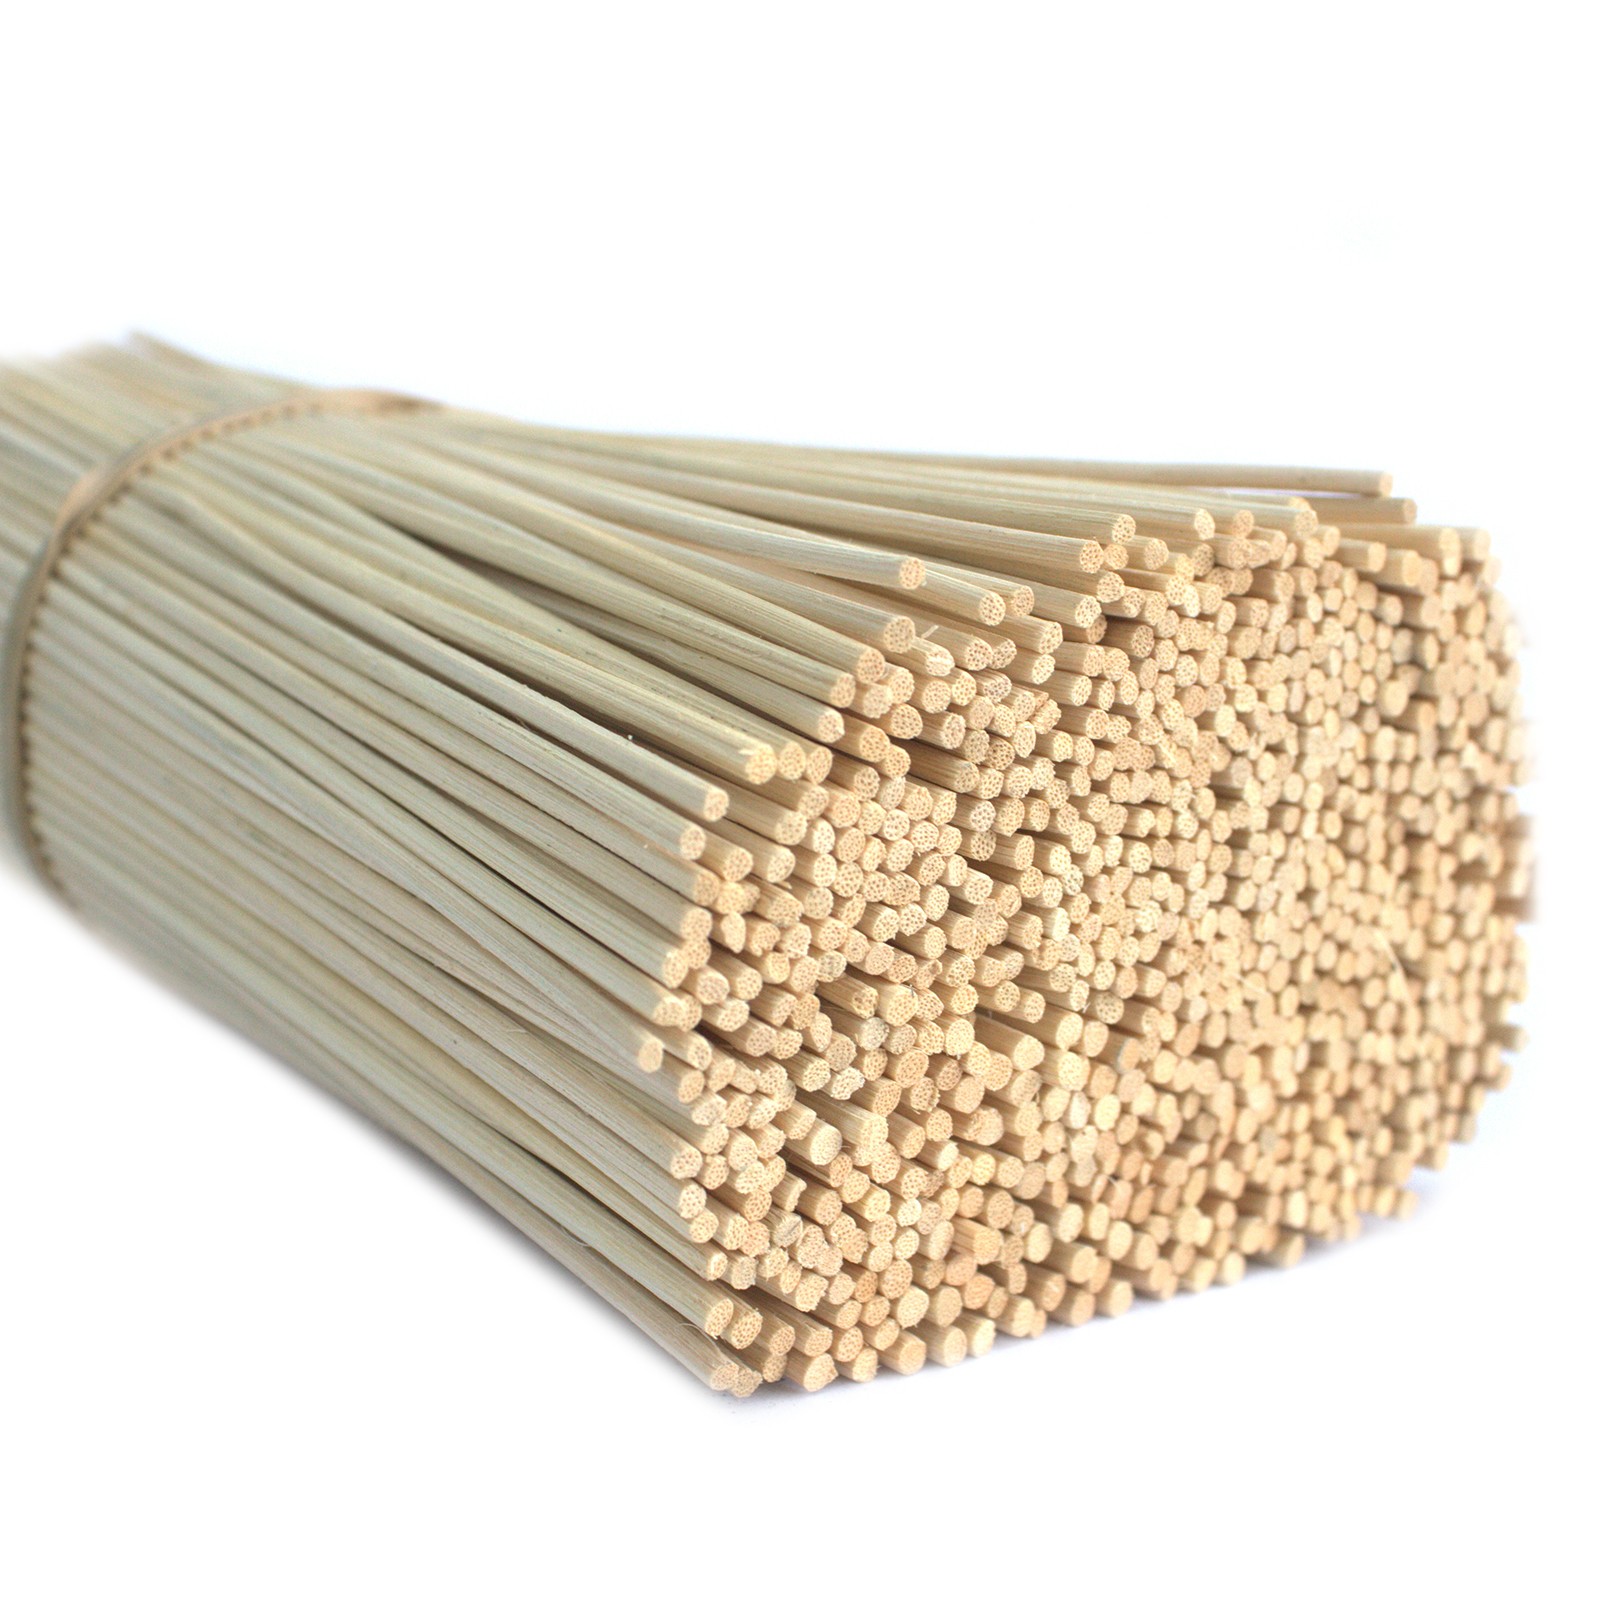 36 Pack of Replacement Reeds 3.5mm